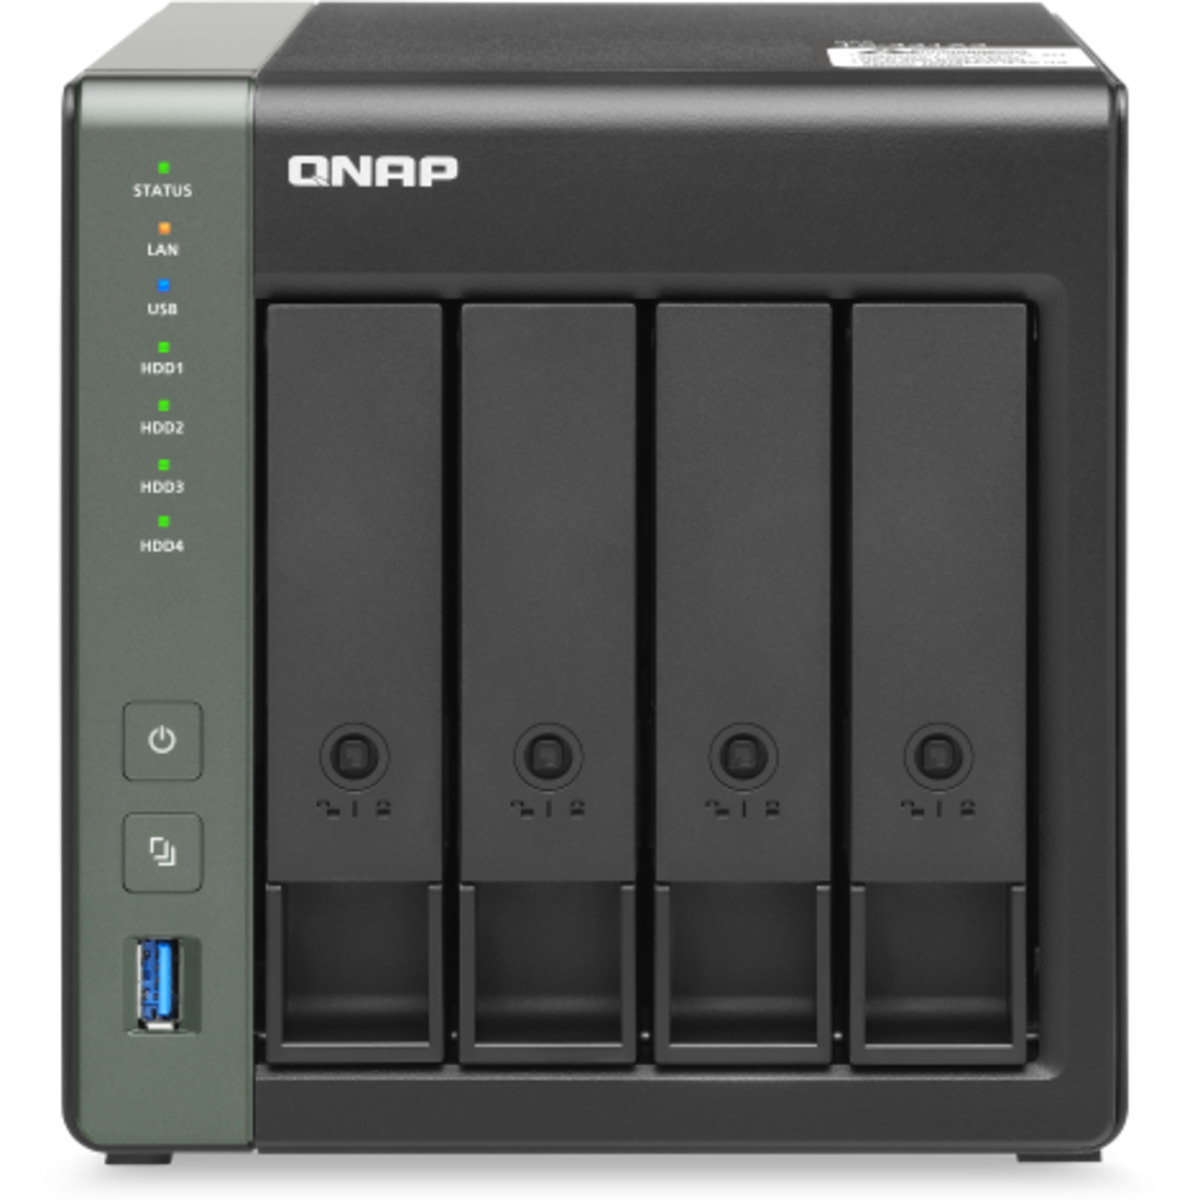 QNAP TS-431X3 8tb 4-Bay Desktop Multimedia / Power User / Business NAS - Network Attached Storage Device 2x4tb Western Digital Red Plus WD40EFPX 3.5 5400rpm SATA 6Gb/s HDD NAS Class Drives Installed - Burn-In Tested - FREE RAM UPGRADE TS-431X3